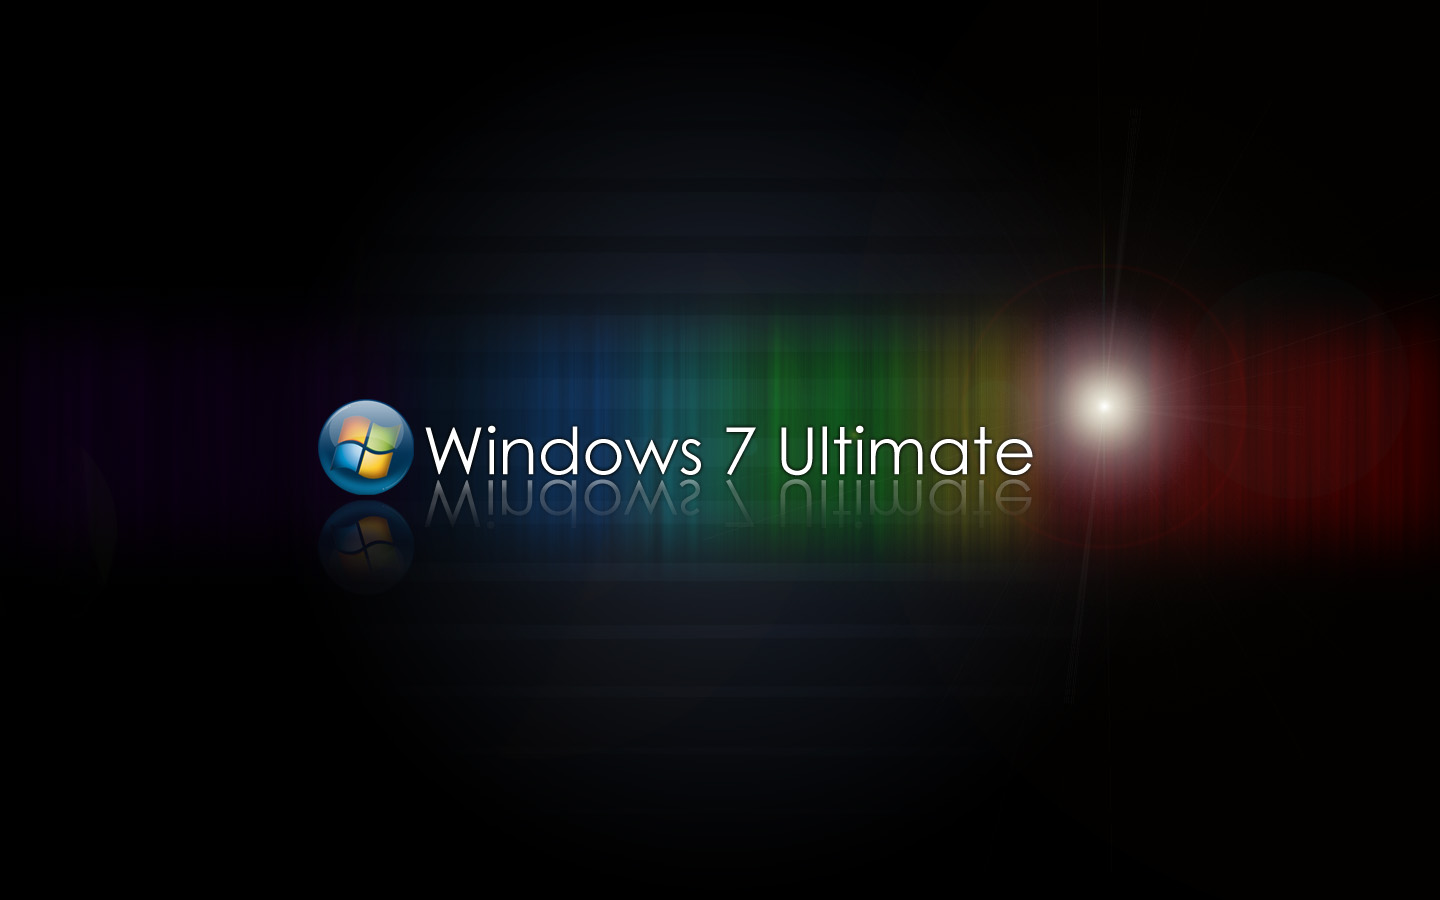 Wallpaper Others Videos Windows Ultimate